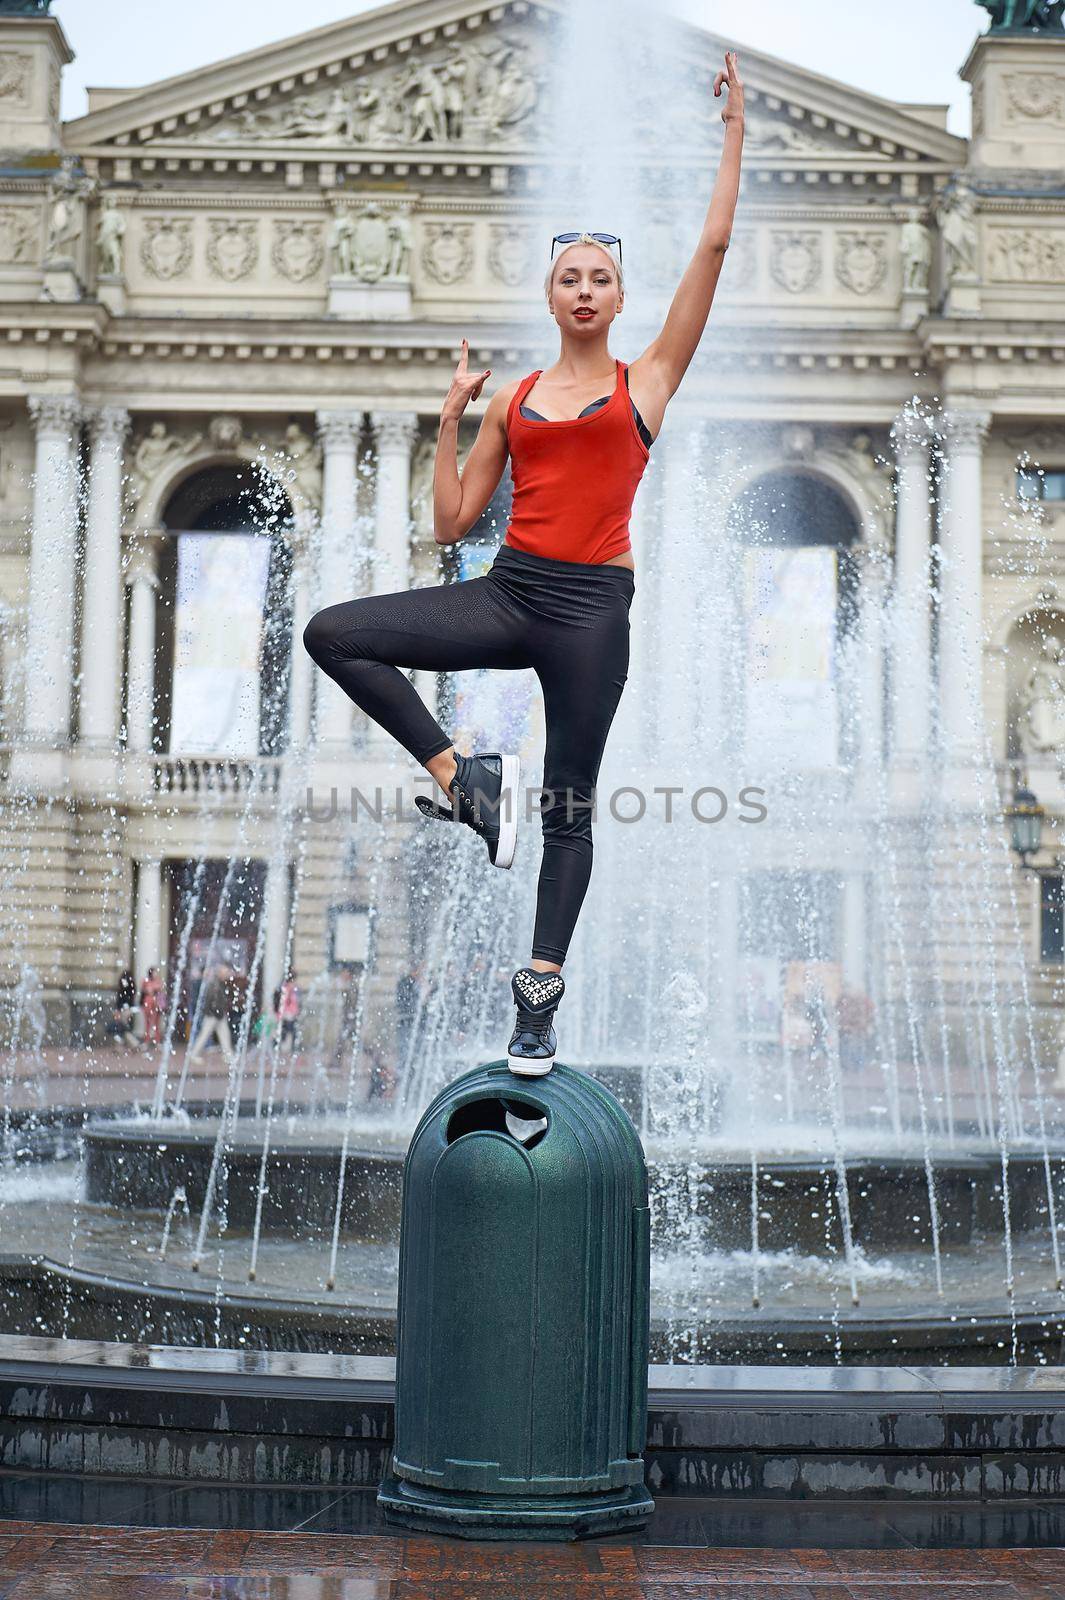 Shot of a young beautiful female hip-hop dancer balancing on one foot posing near the fountain at the city center performing outdoors.